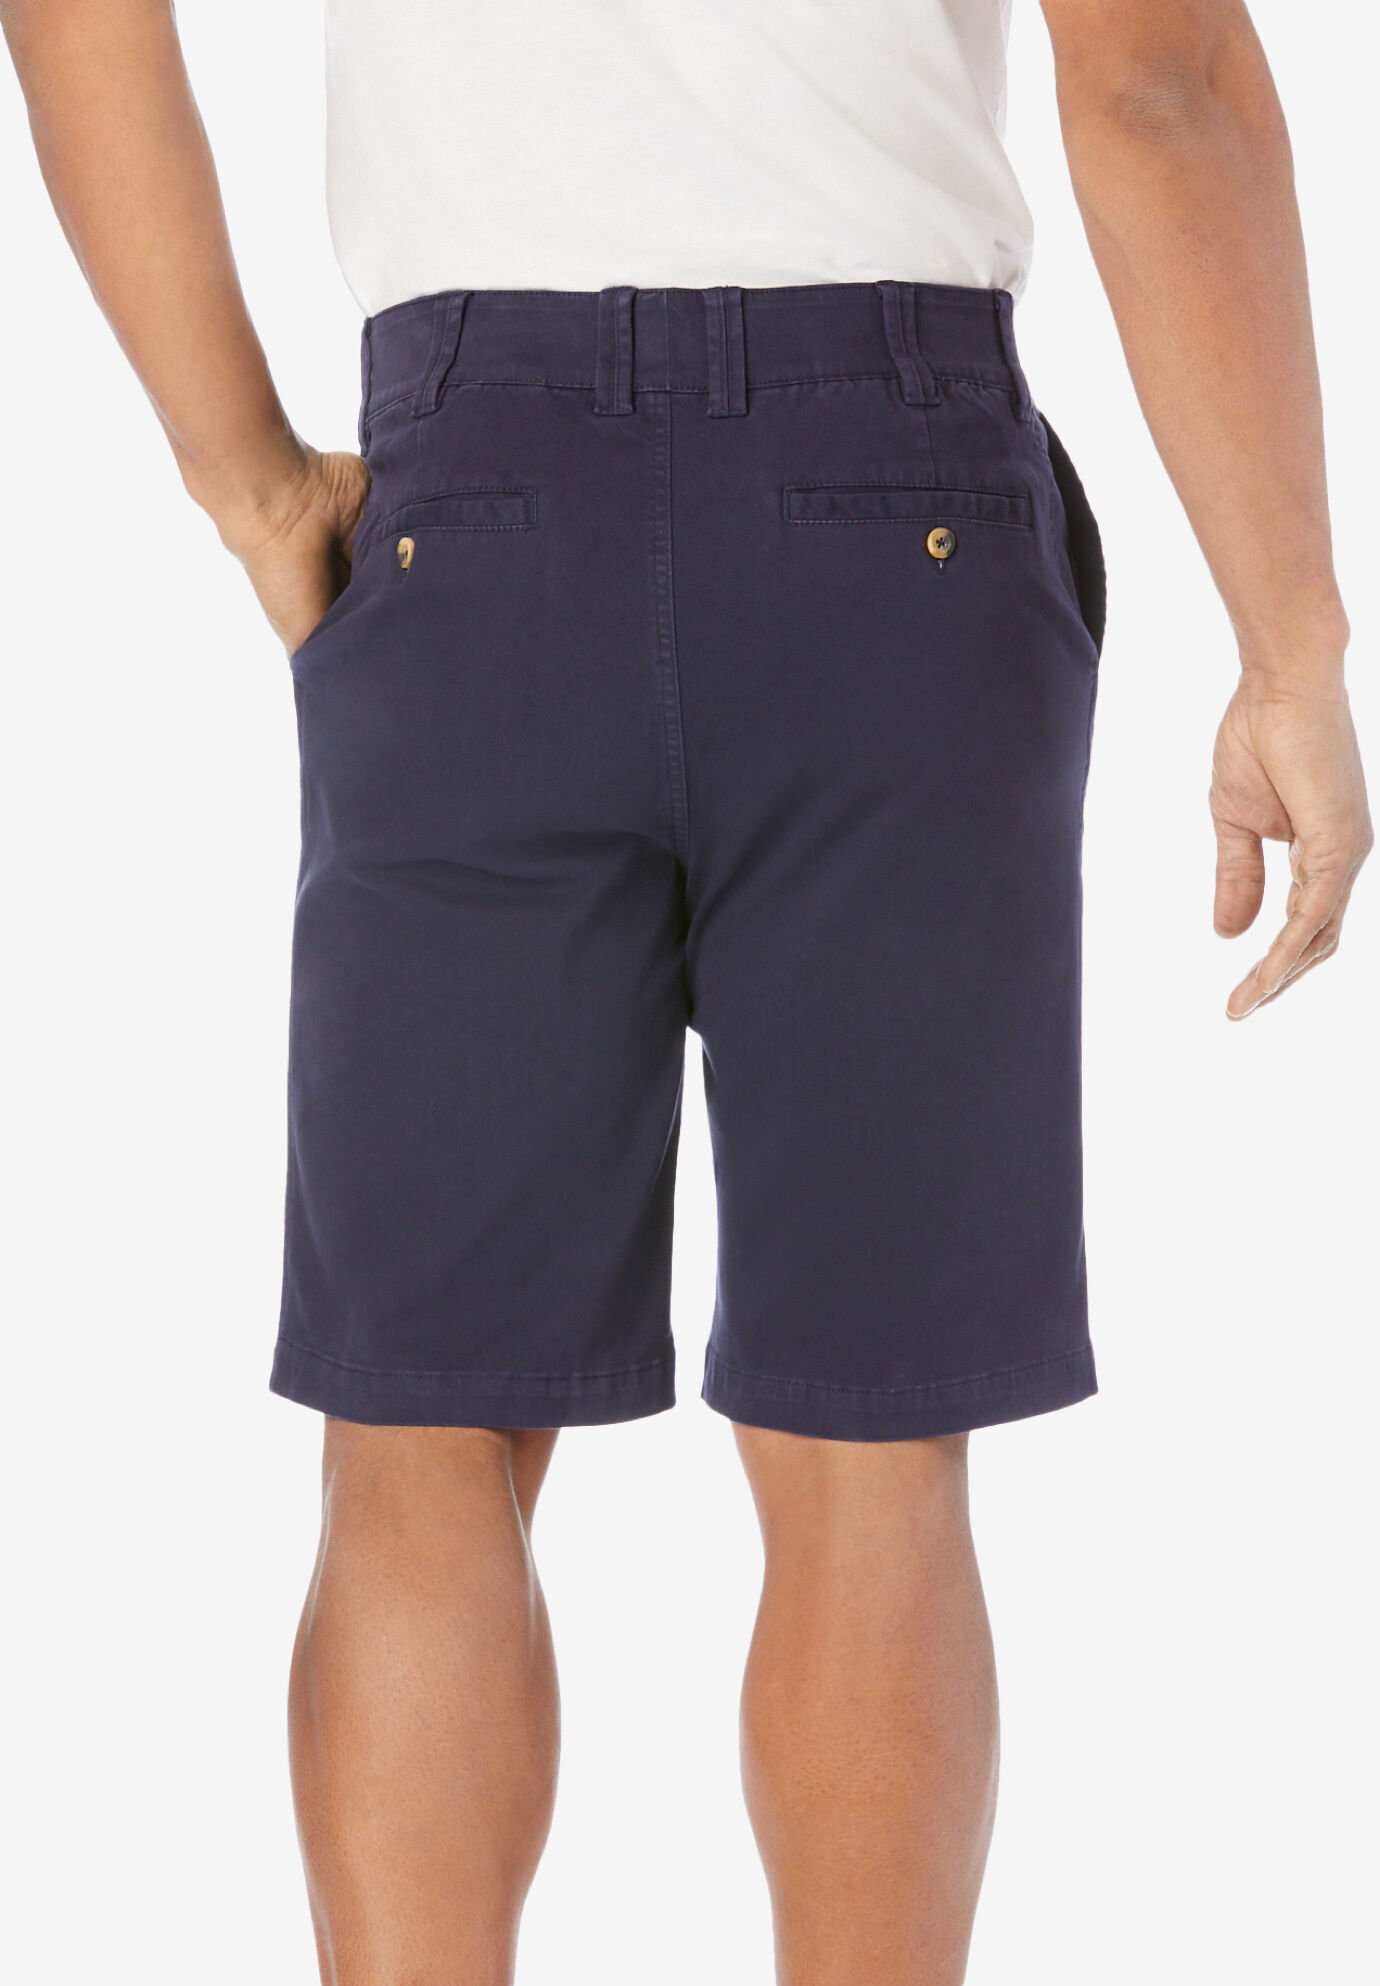 Revolutee Mens Plus Size Cotton Classic Knee Length Flat Front Shorts